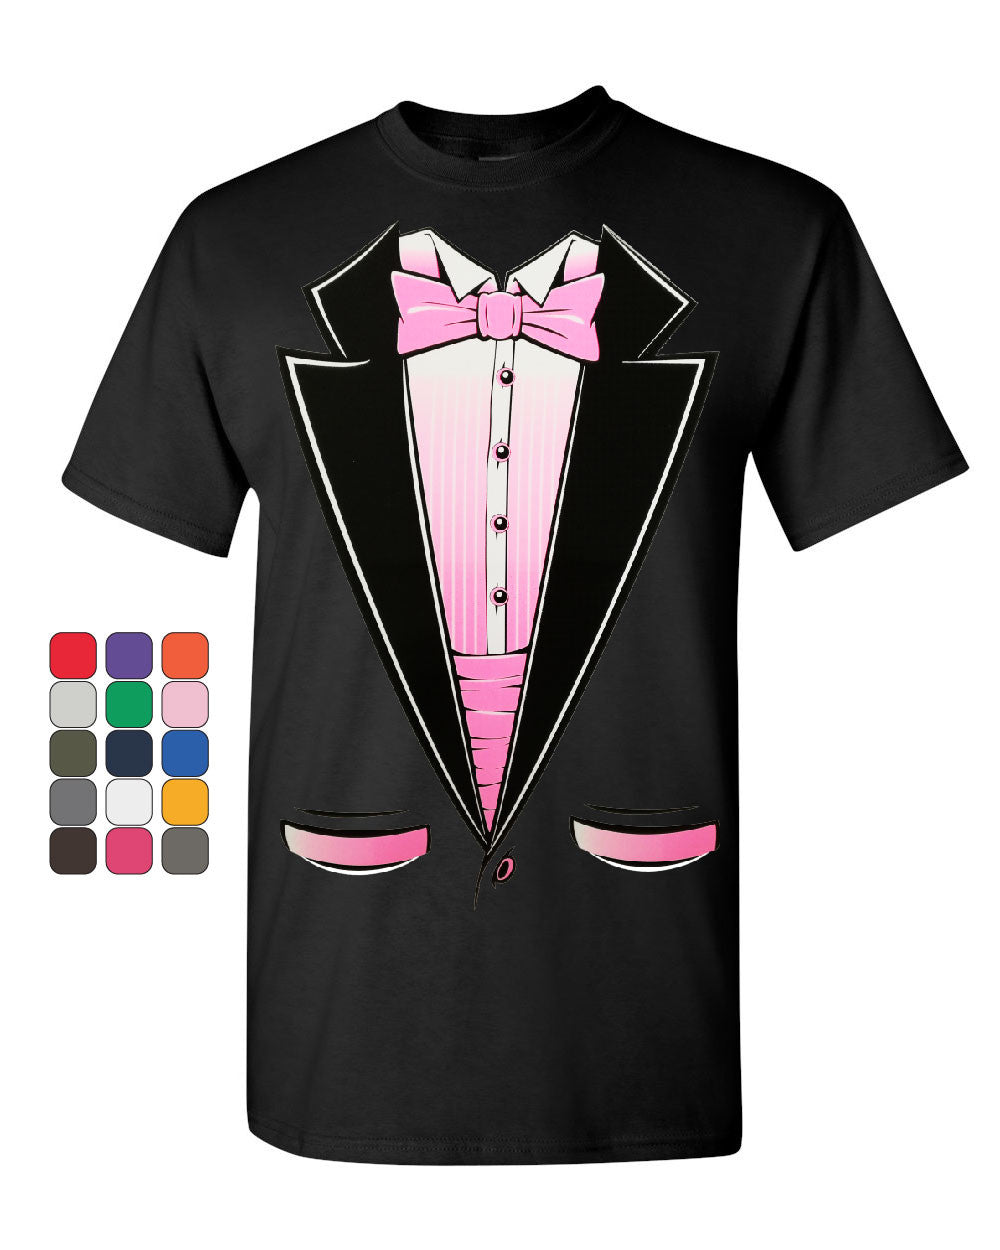 Neon Pink Tuxedo Youth's T-Shirt Humor Wedding Party Funny Tux Shirts ...